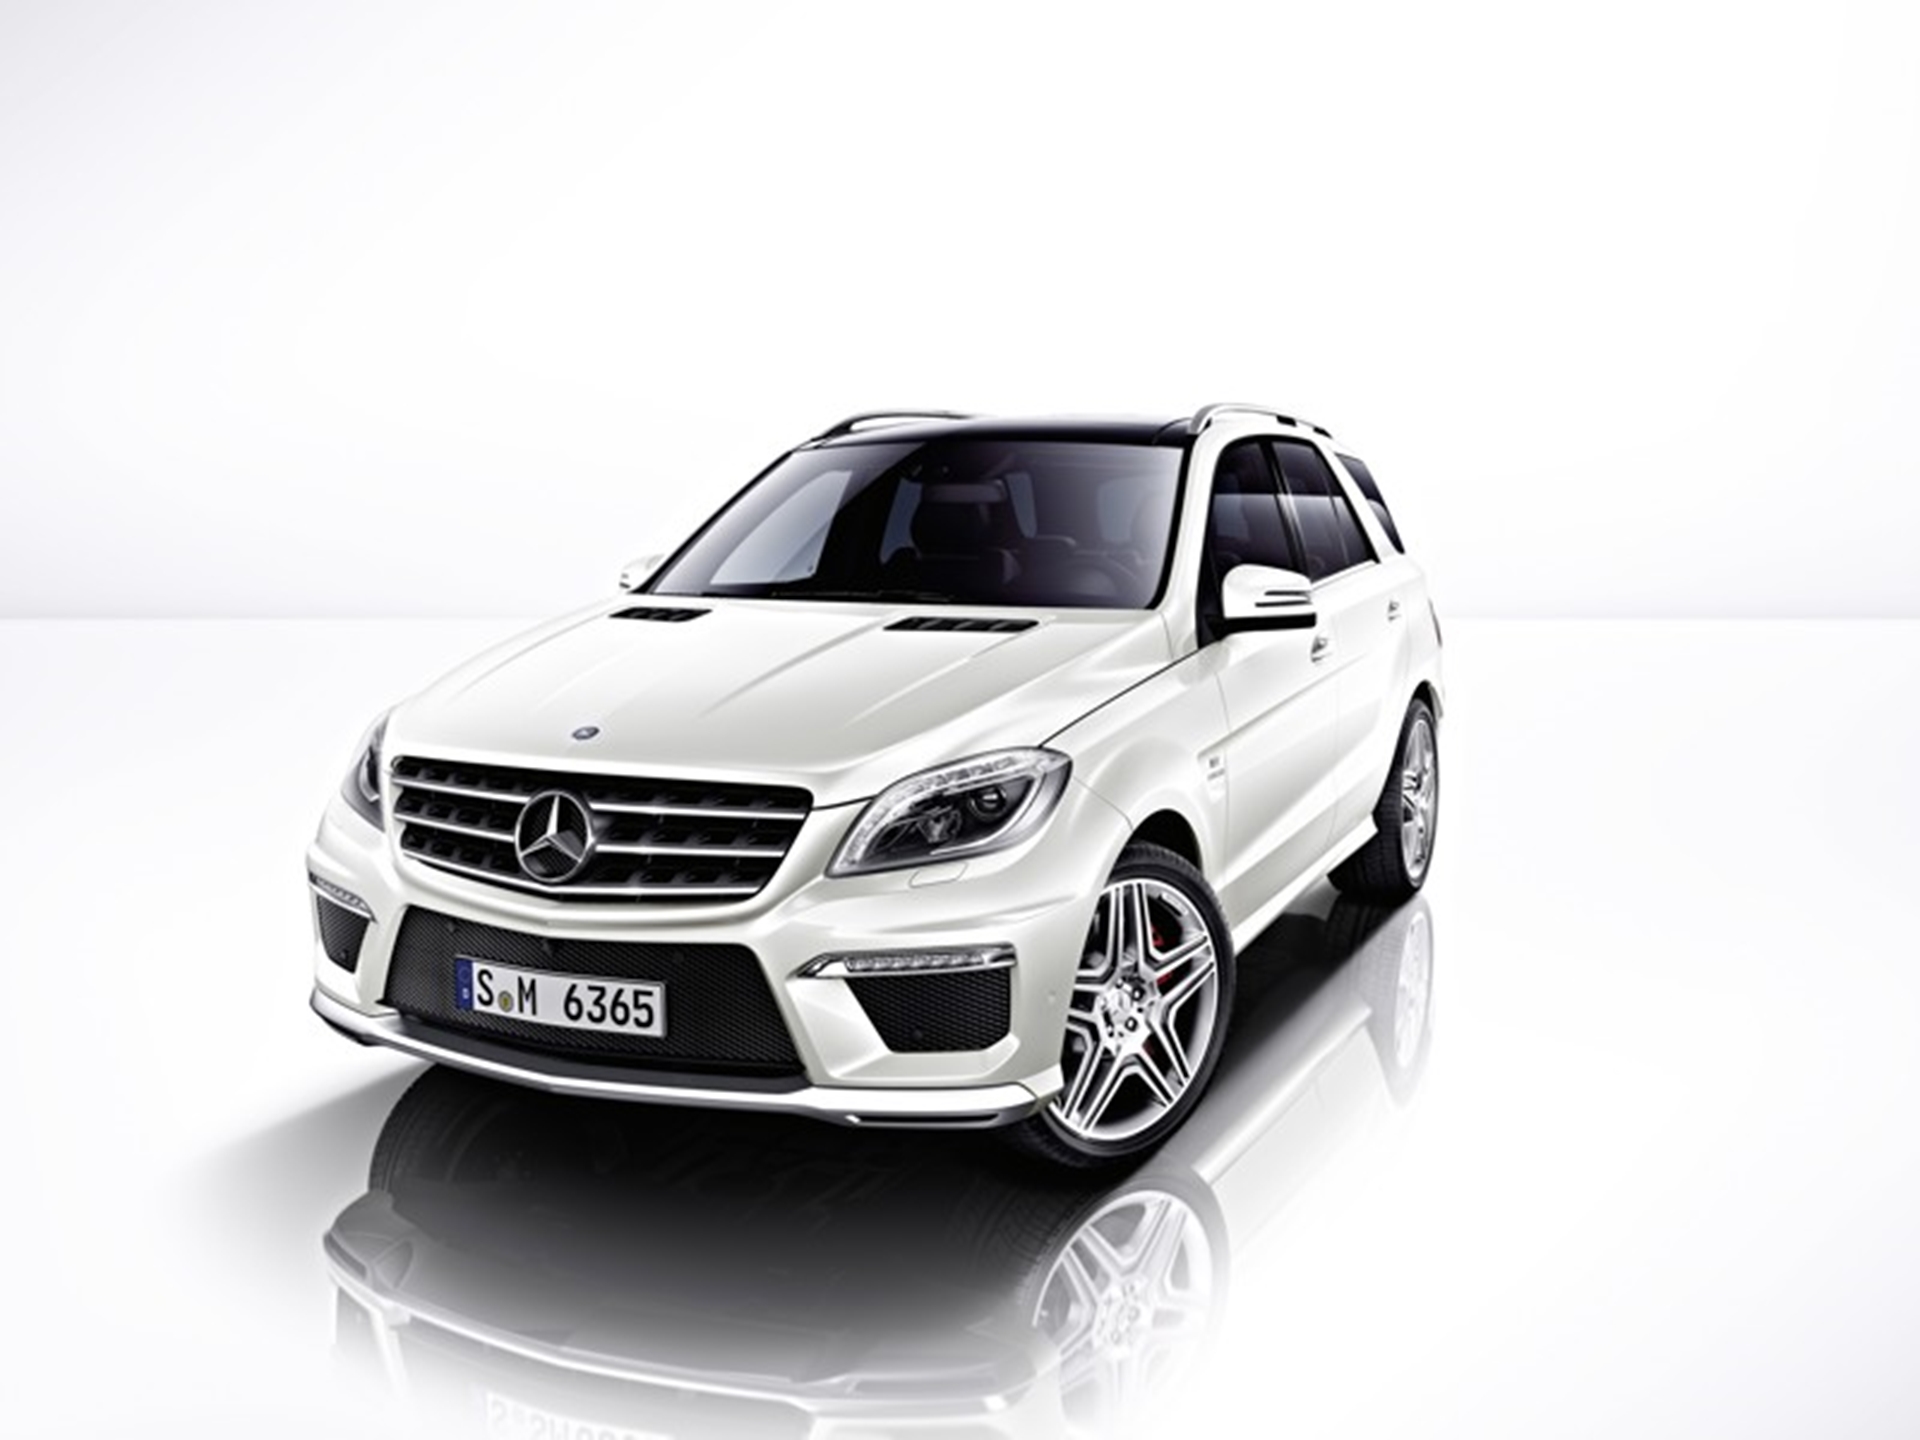 Mercedes-Benz ML 63 AMG Efficiency and superlative performance